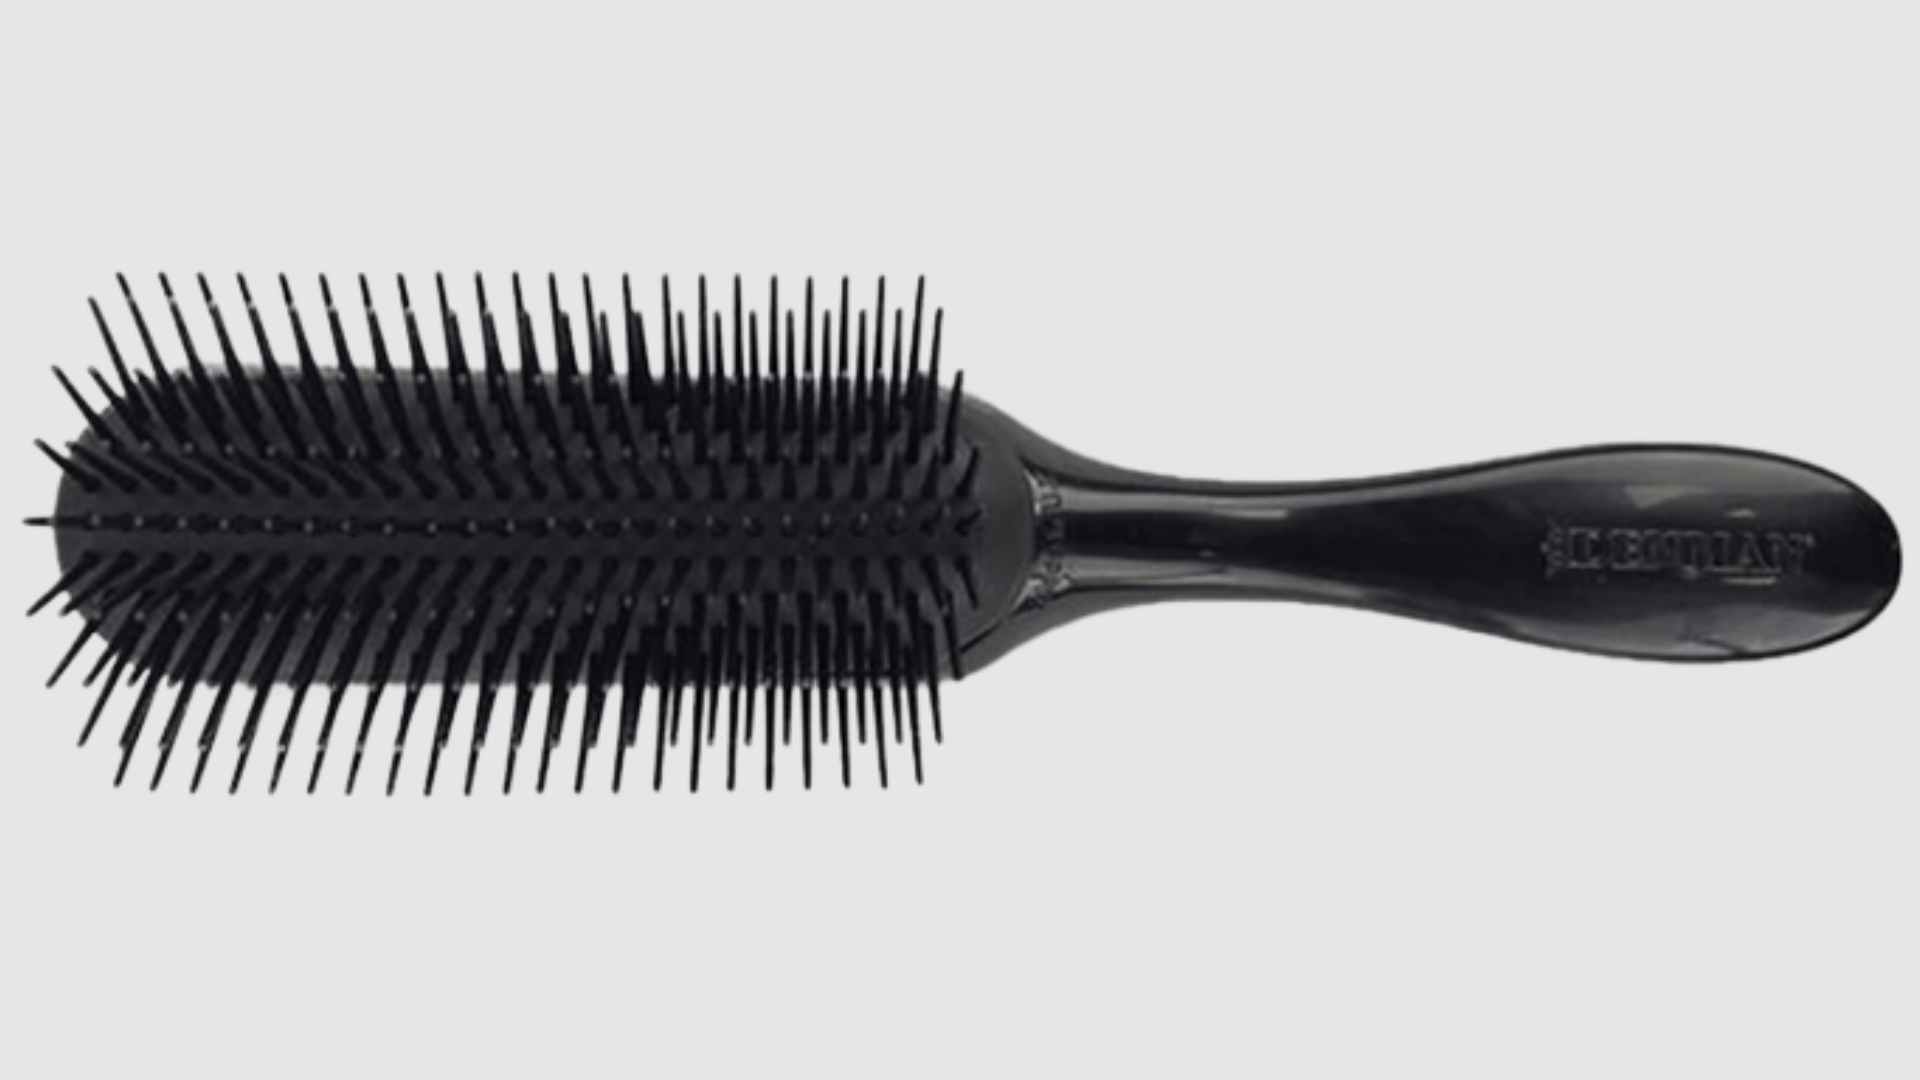 Denman hairbrush used for styling bob hairstyles